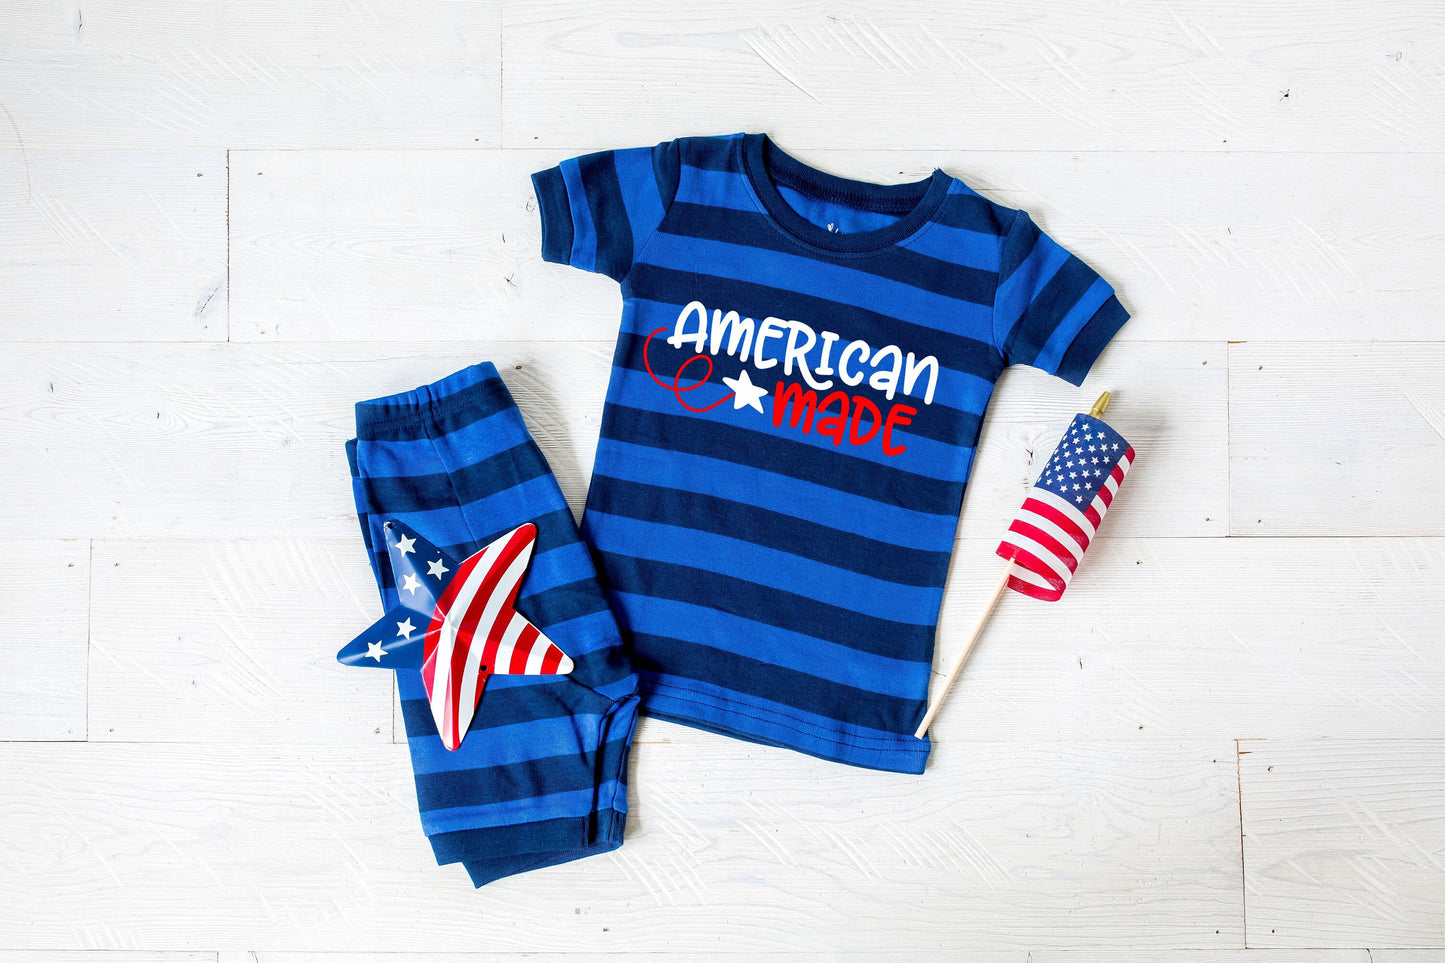 American Made Blue Striped Shorts Toddler and Kids Pajamas - Kids 4th of July Pajamas - 4th of July Toddler Pajamas Set - Cute Kids Pajamas